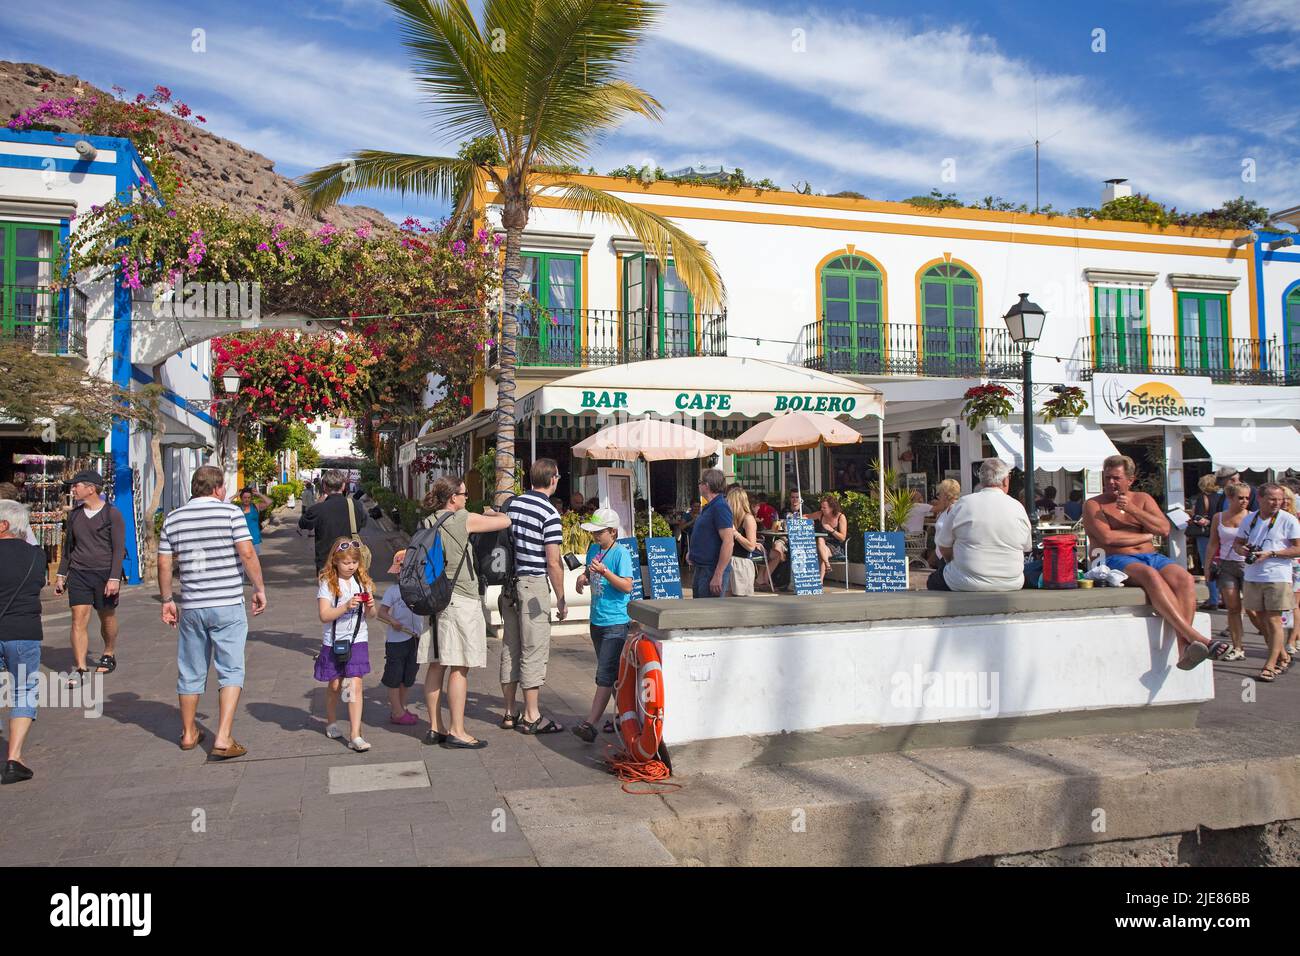 Restaurants and bars at the harbour promenade, flower decoration on arches in the alleys of Puerto de Mogan, Gran Canaria, Canary islands, Spain Stock Photo